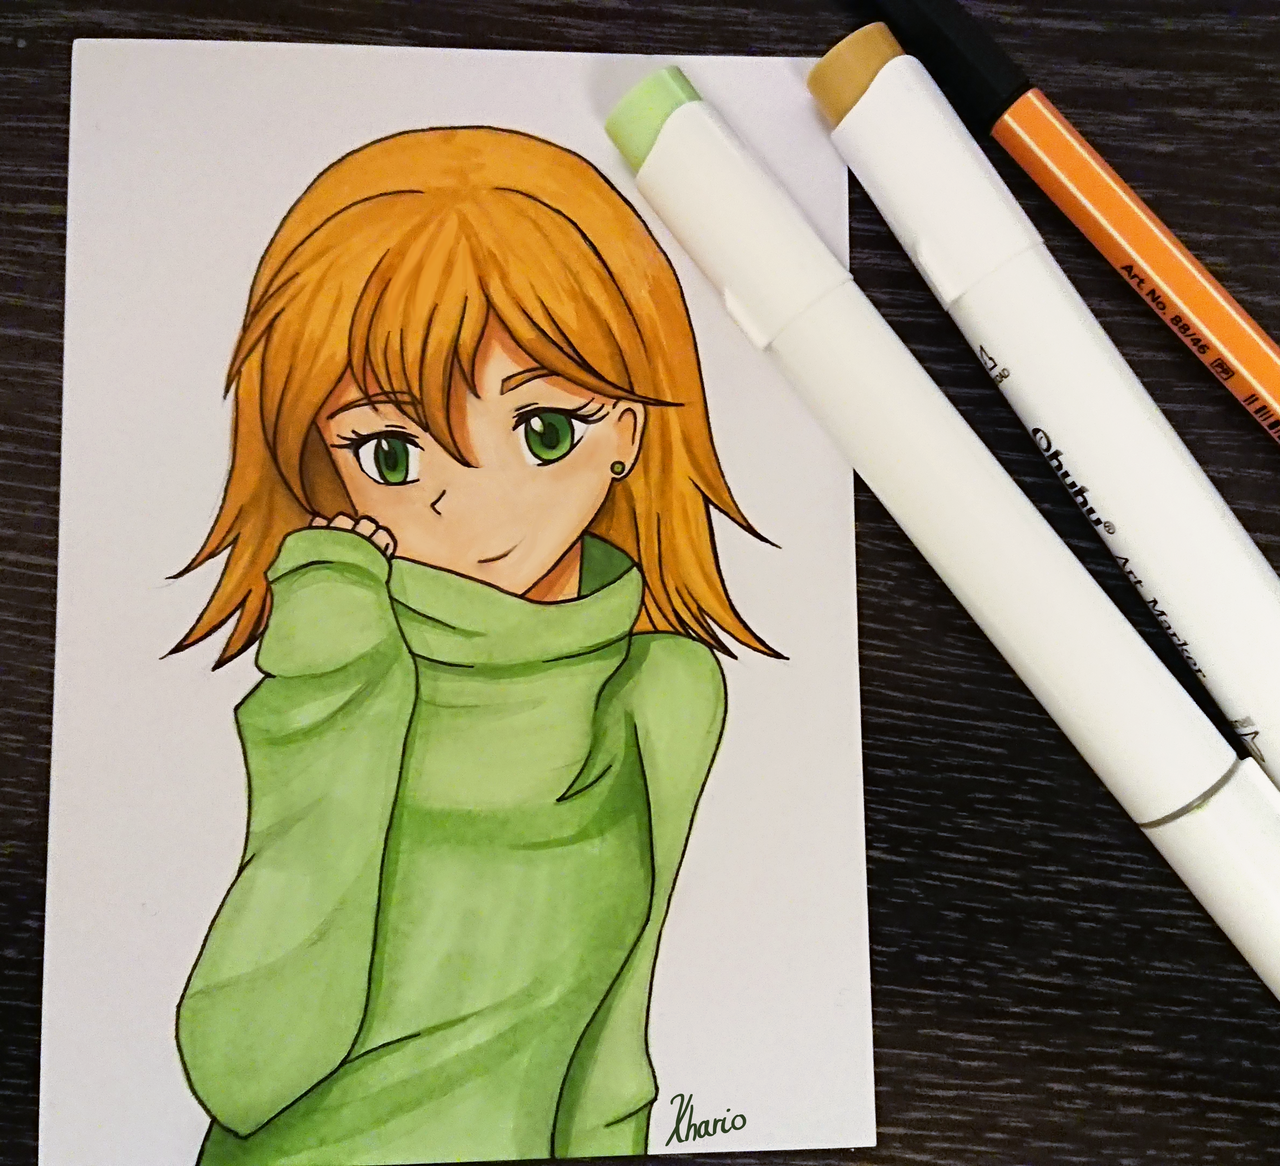 Watercolor Effects with Alcohol Markers by kabocha on DeviantArt